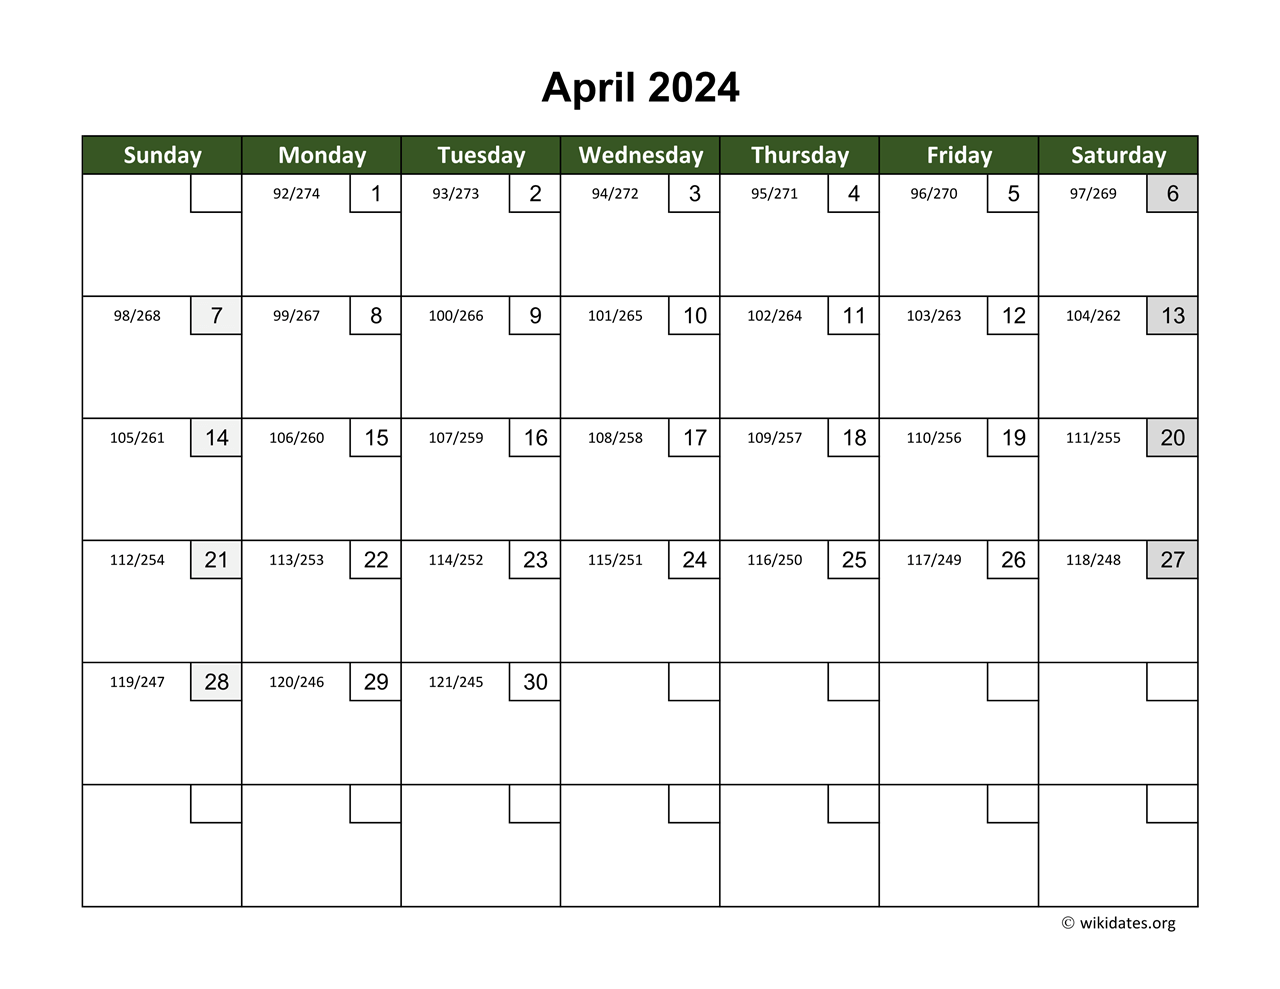 April 2024 Calendar with Day Numbers